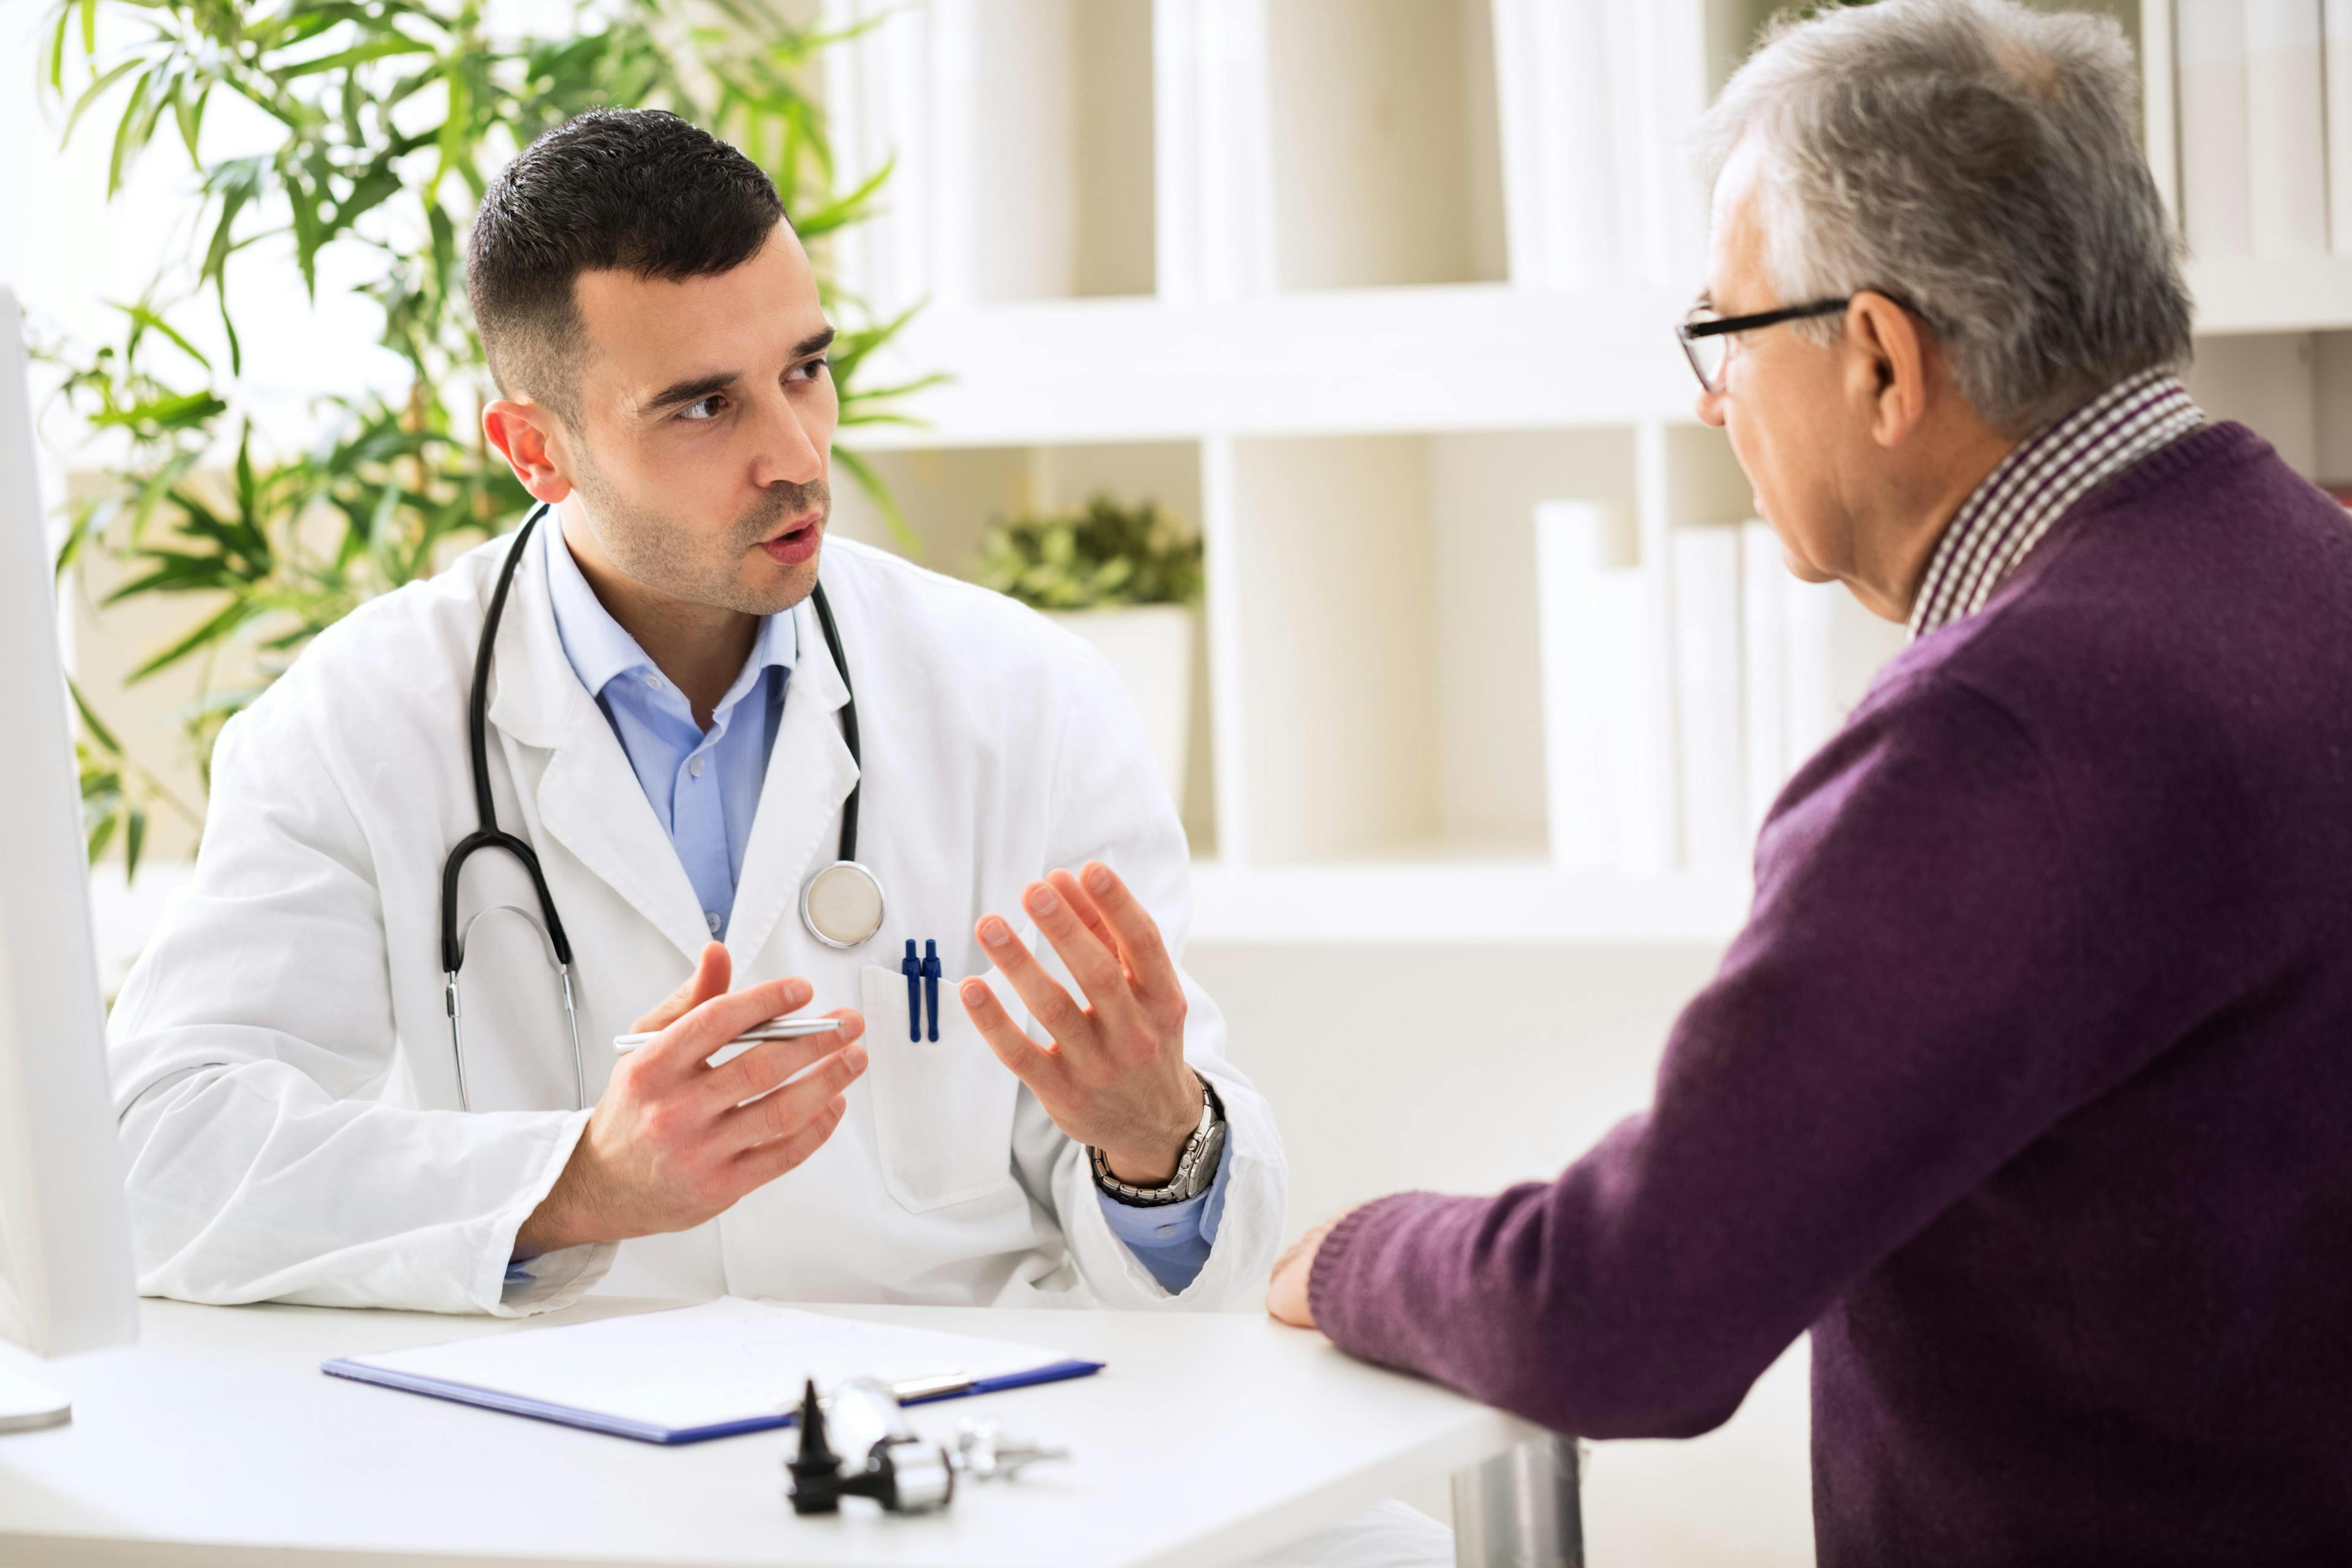 Doctor counseling a patient on weight loss strategies